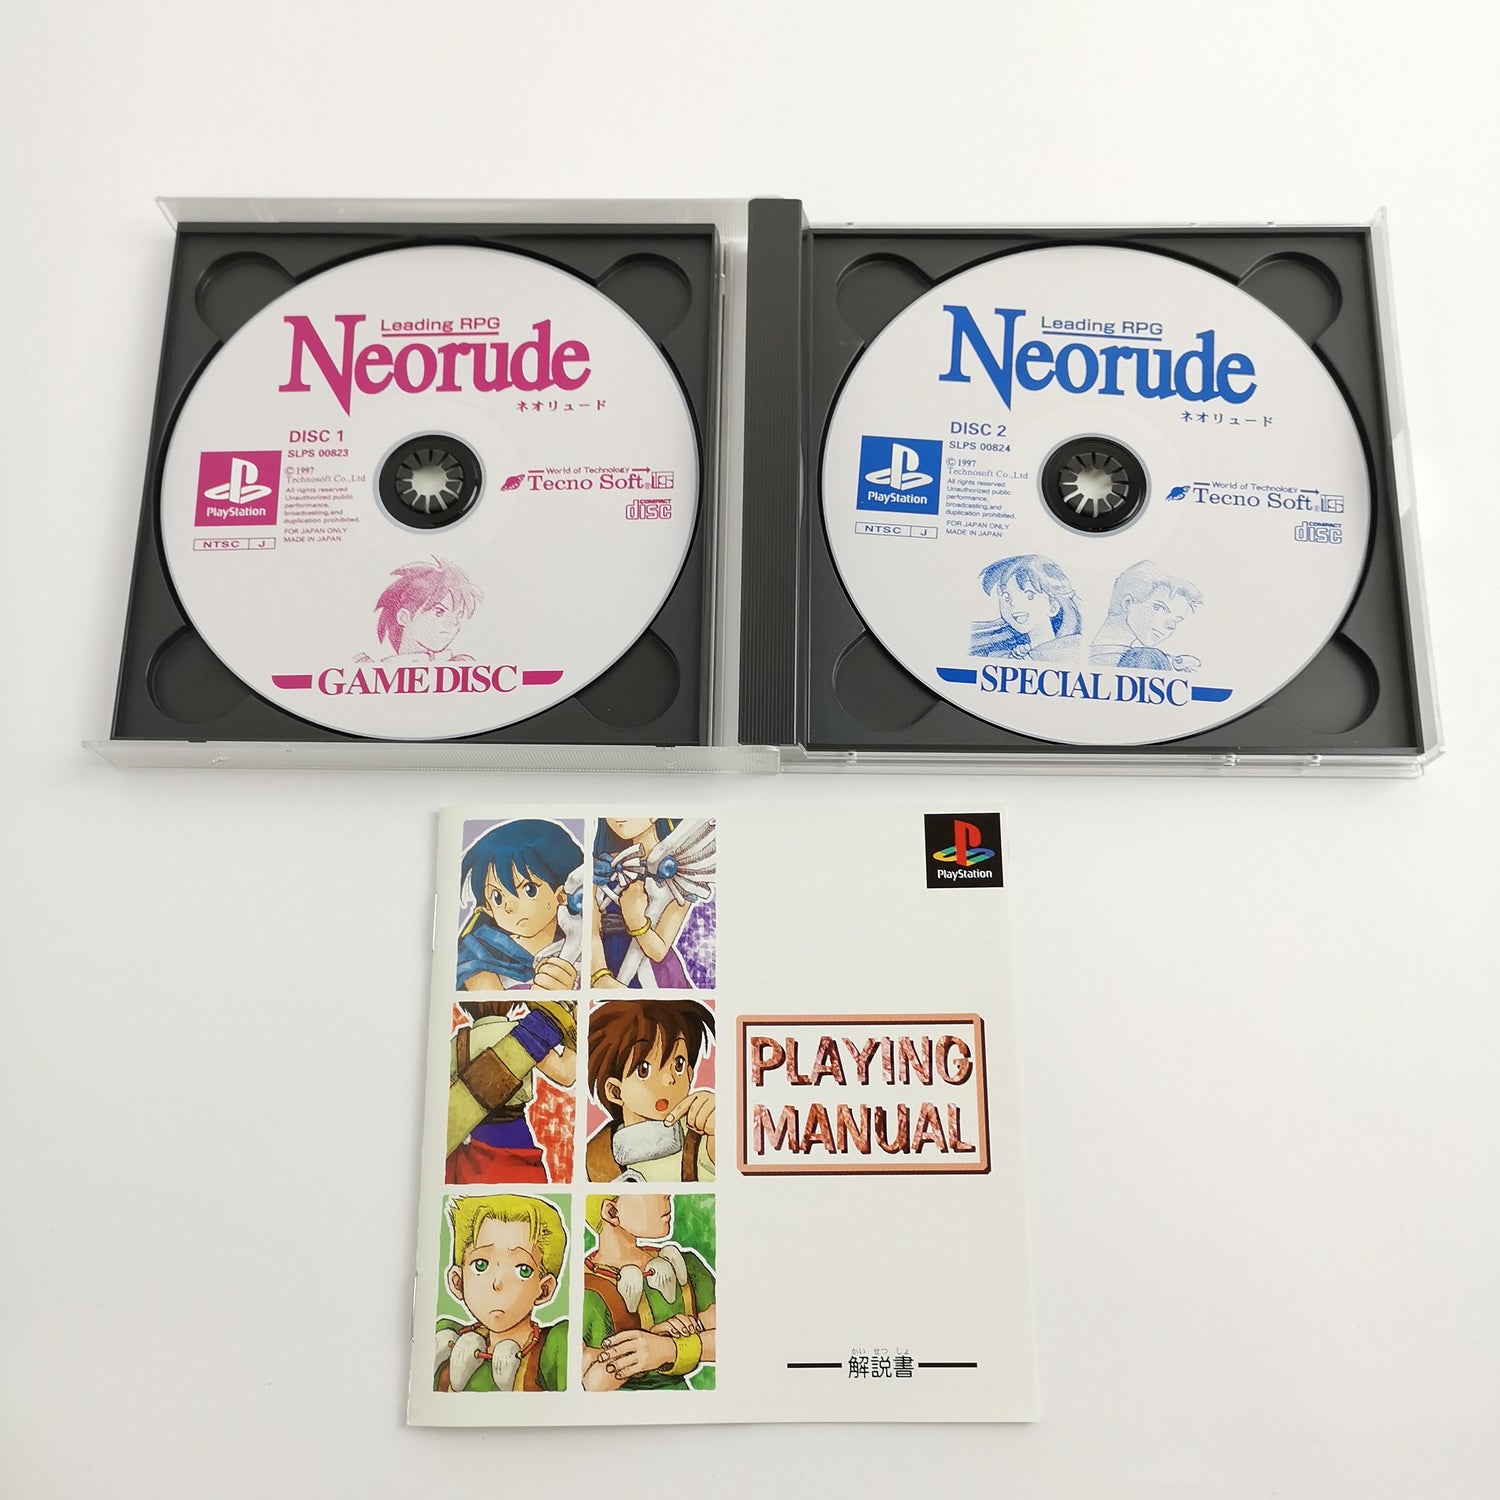 Sony Playstation 1 Game : Leading RPG Neorude | PS1 PSX - OVP NTSC-J Japan